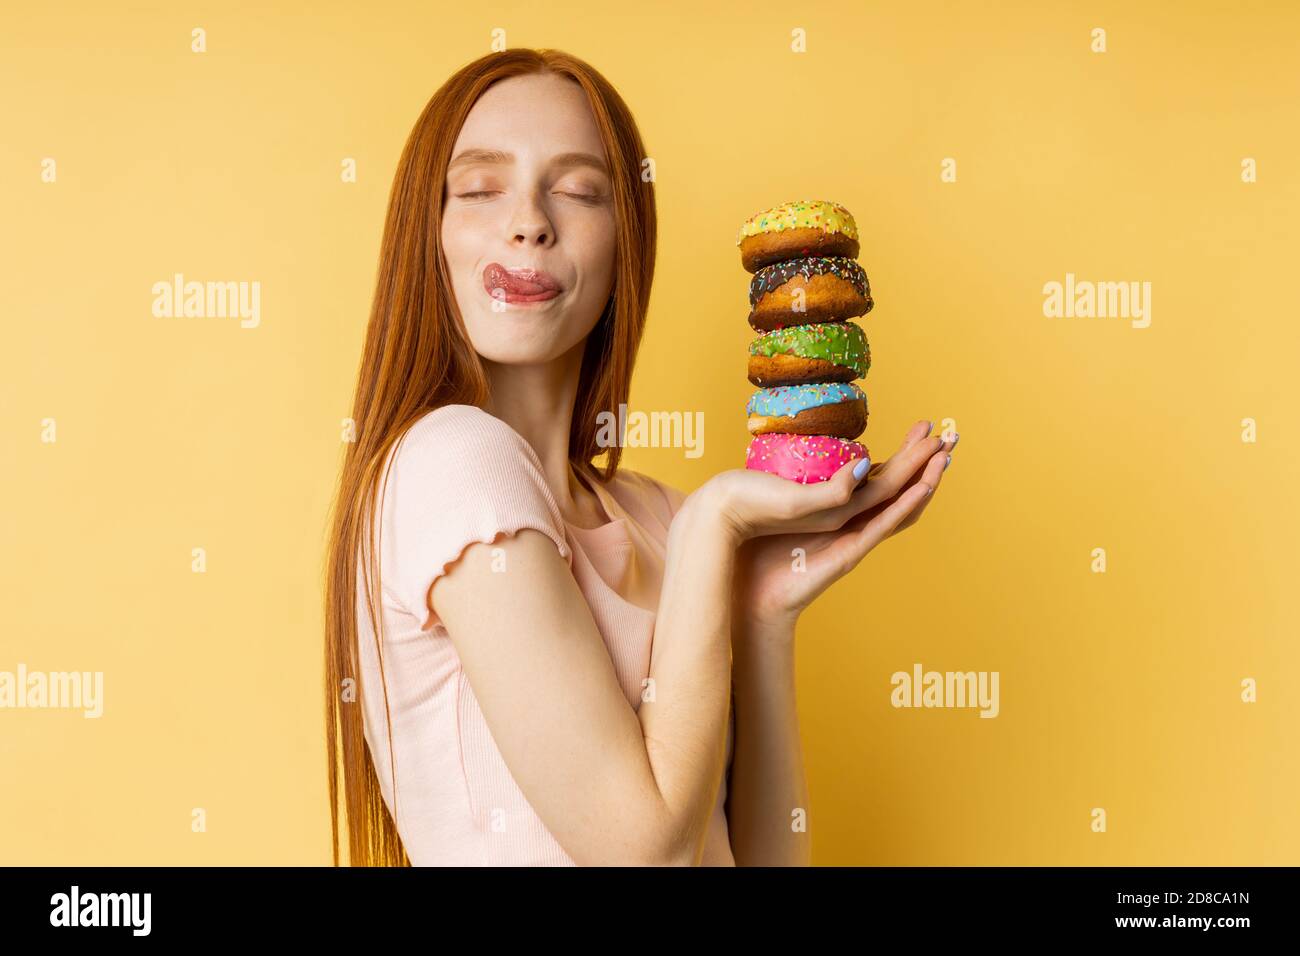 Shot of happy caucasian woman with red hair, closed eyes, licking her lips with tongue, holding in hands delicious colorful donuts isolated over yello Stock Photo